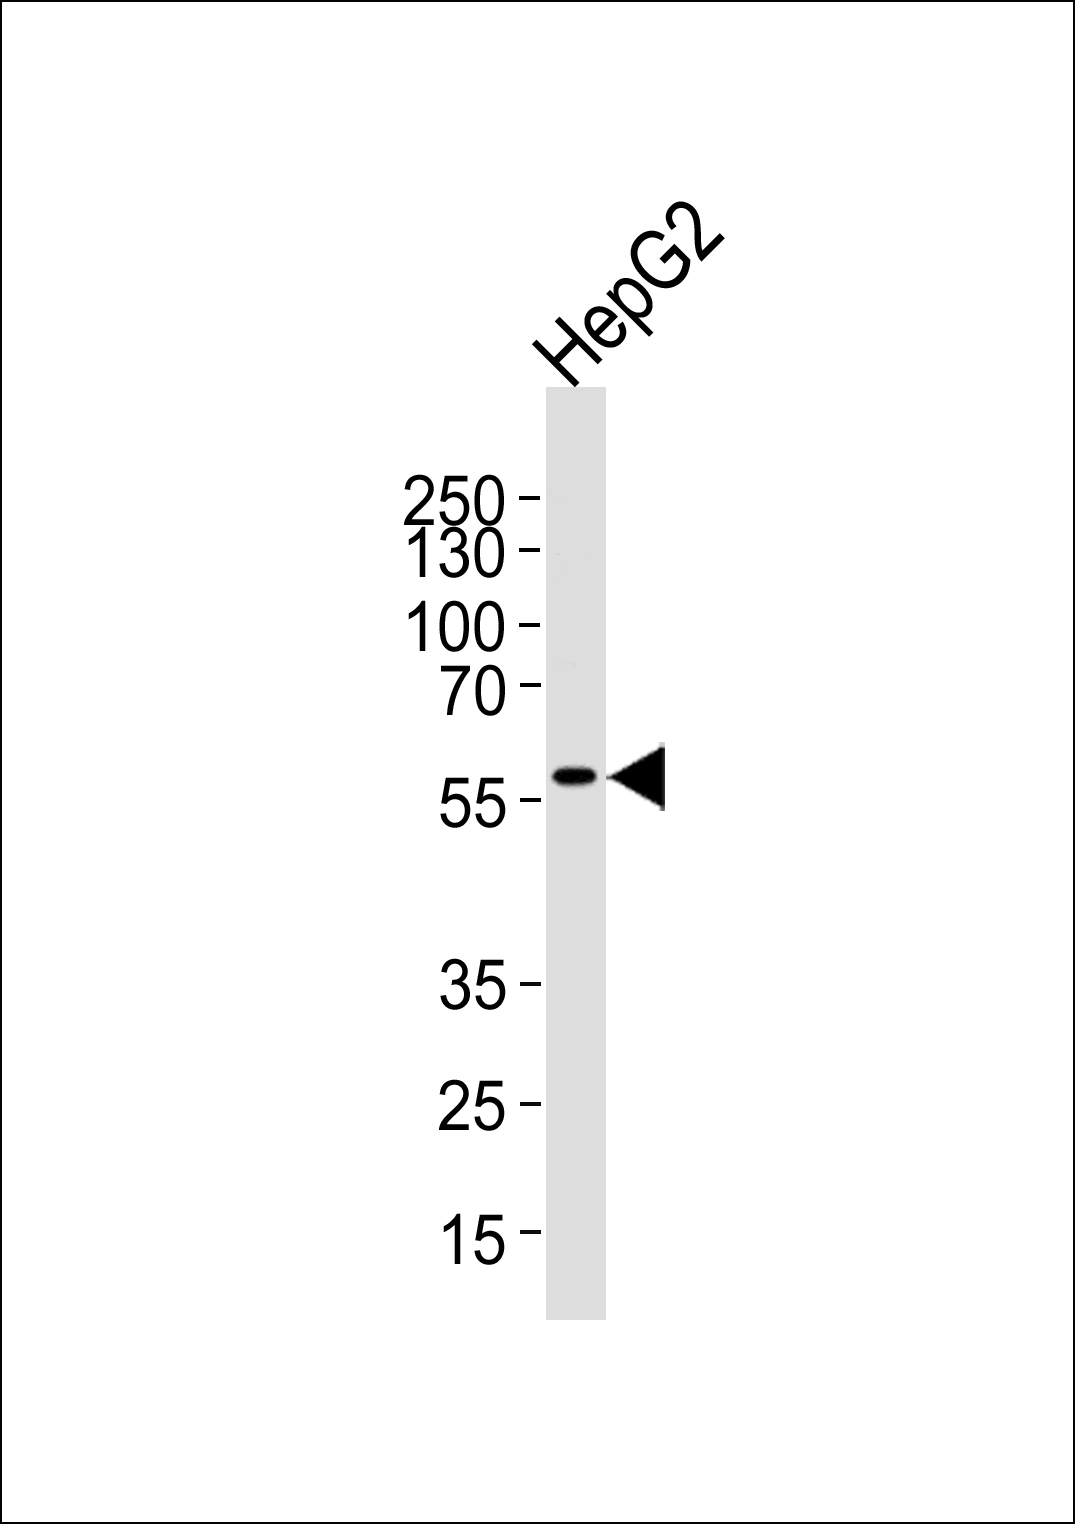 Western blot analysis of lysate from HepG2 cell line, using MLLT3 C-term Antibody(Cat. #AP6190b). AP6190b was diluted at 1:1000 at each lane. A goat anti-rabbit IgG H&L(HRP) at 1:5000 dilution was used as the secondary antibody. Lysate at 35ug per lane. 